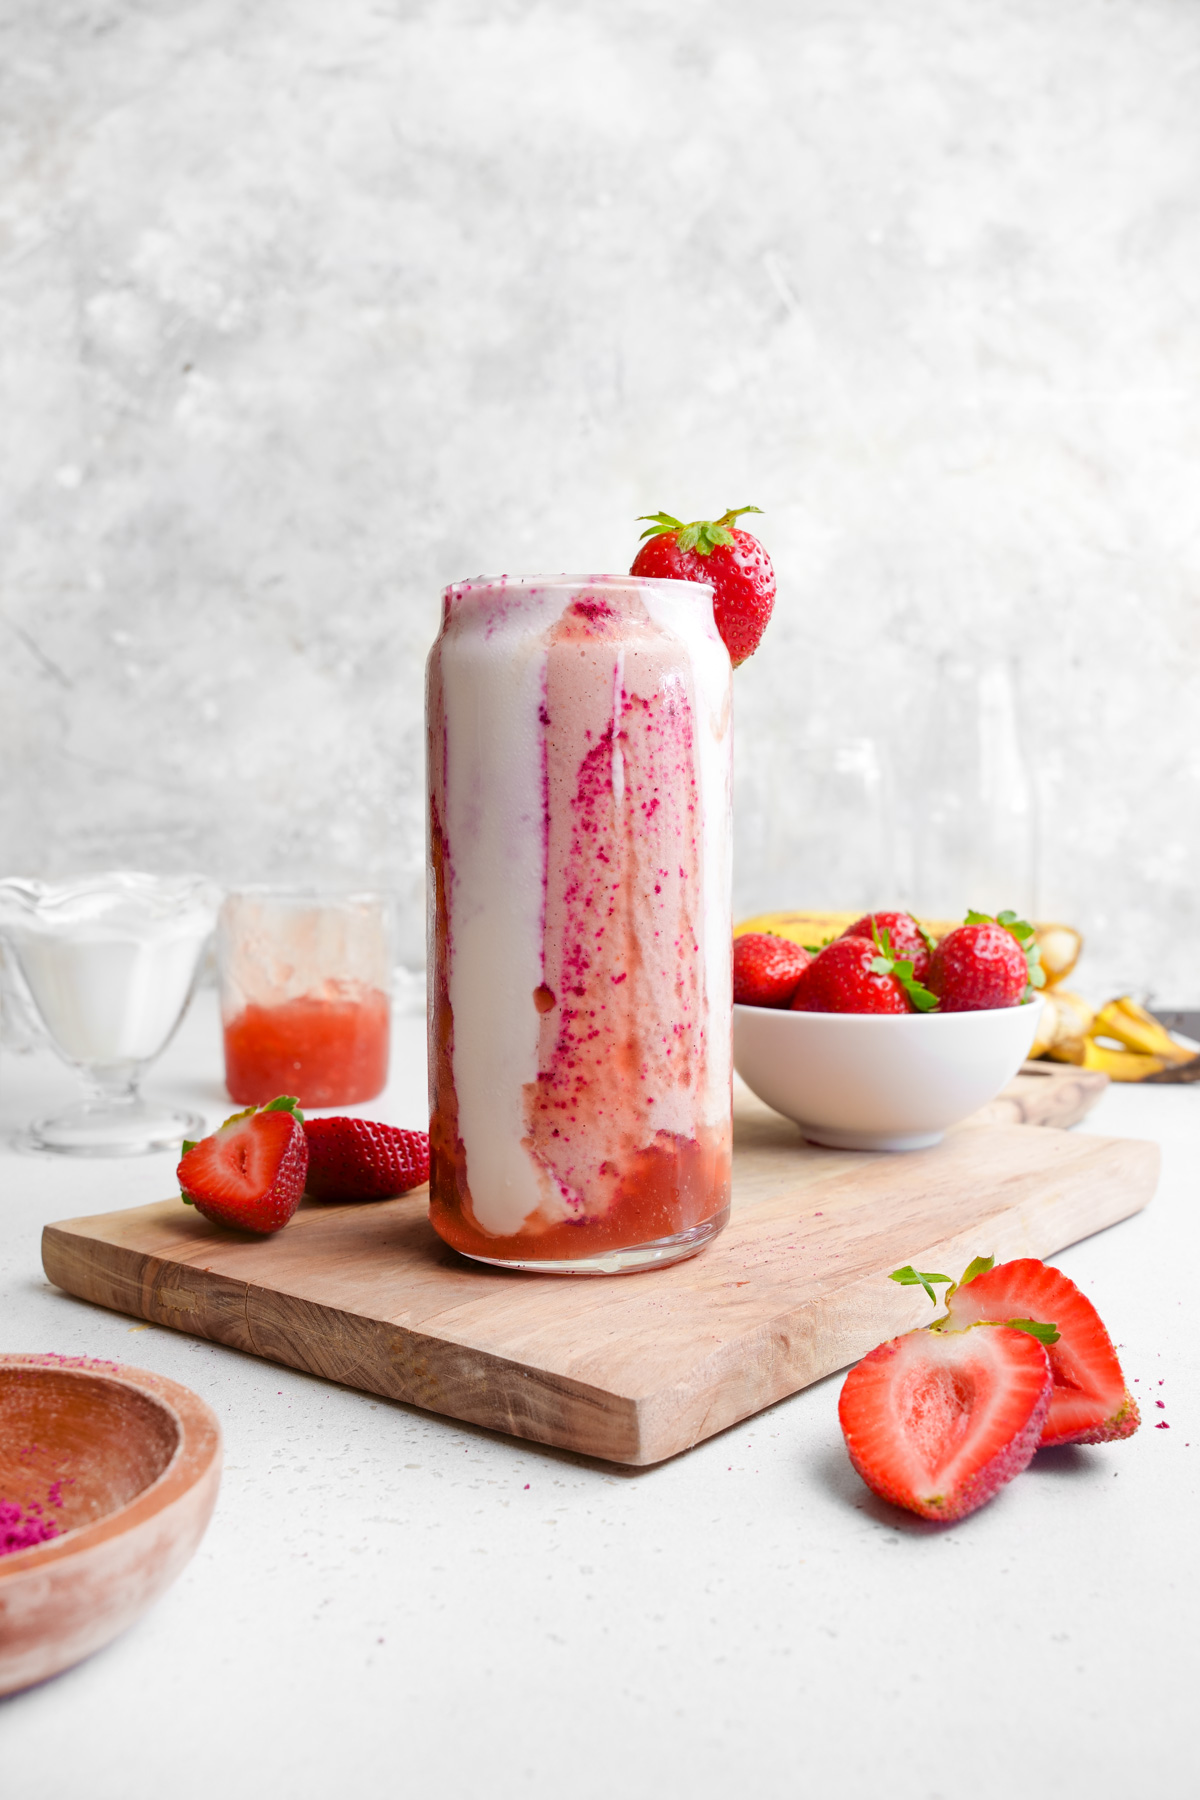 the strawberry glaze smoothie with fresh strawberries and bananas all around it